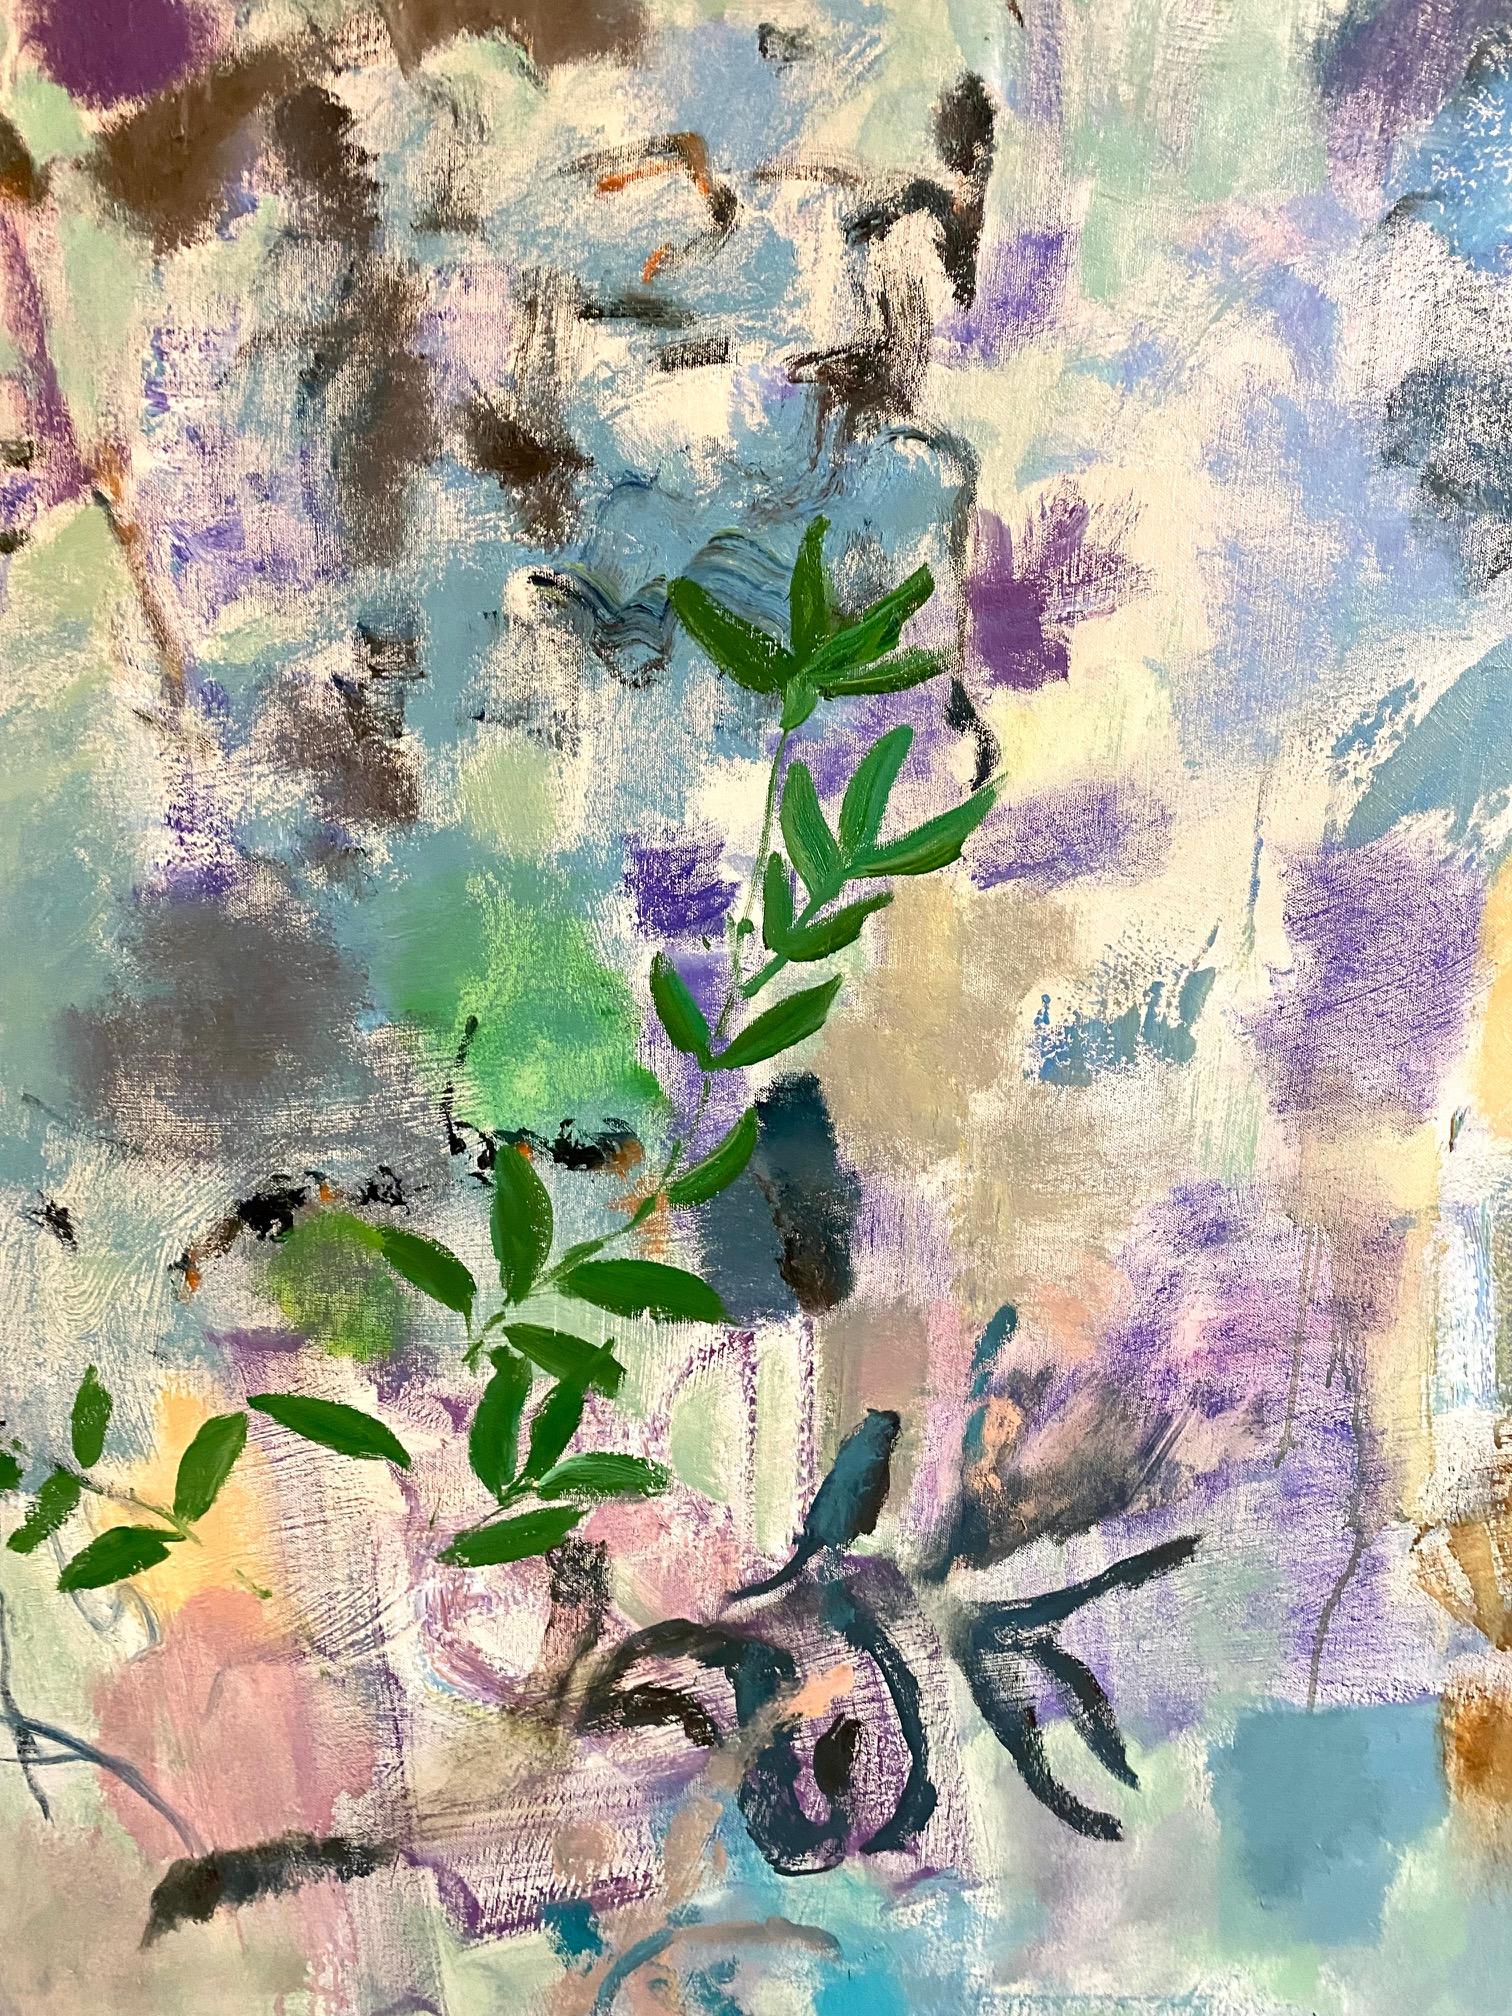 Lively abstract brushwork in lilac, violet, blue, brown, peach, pink and lush green on a soft, mottled background with pale mint green and light gray blue suggests flowers, botany and a butterfly. Signed, dated and titled on verso.

Pastoral and